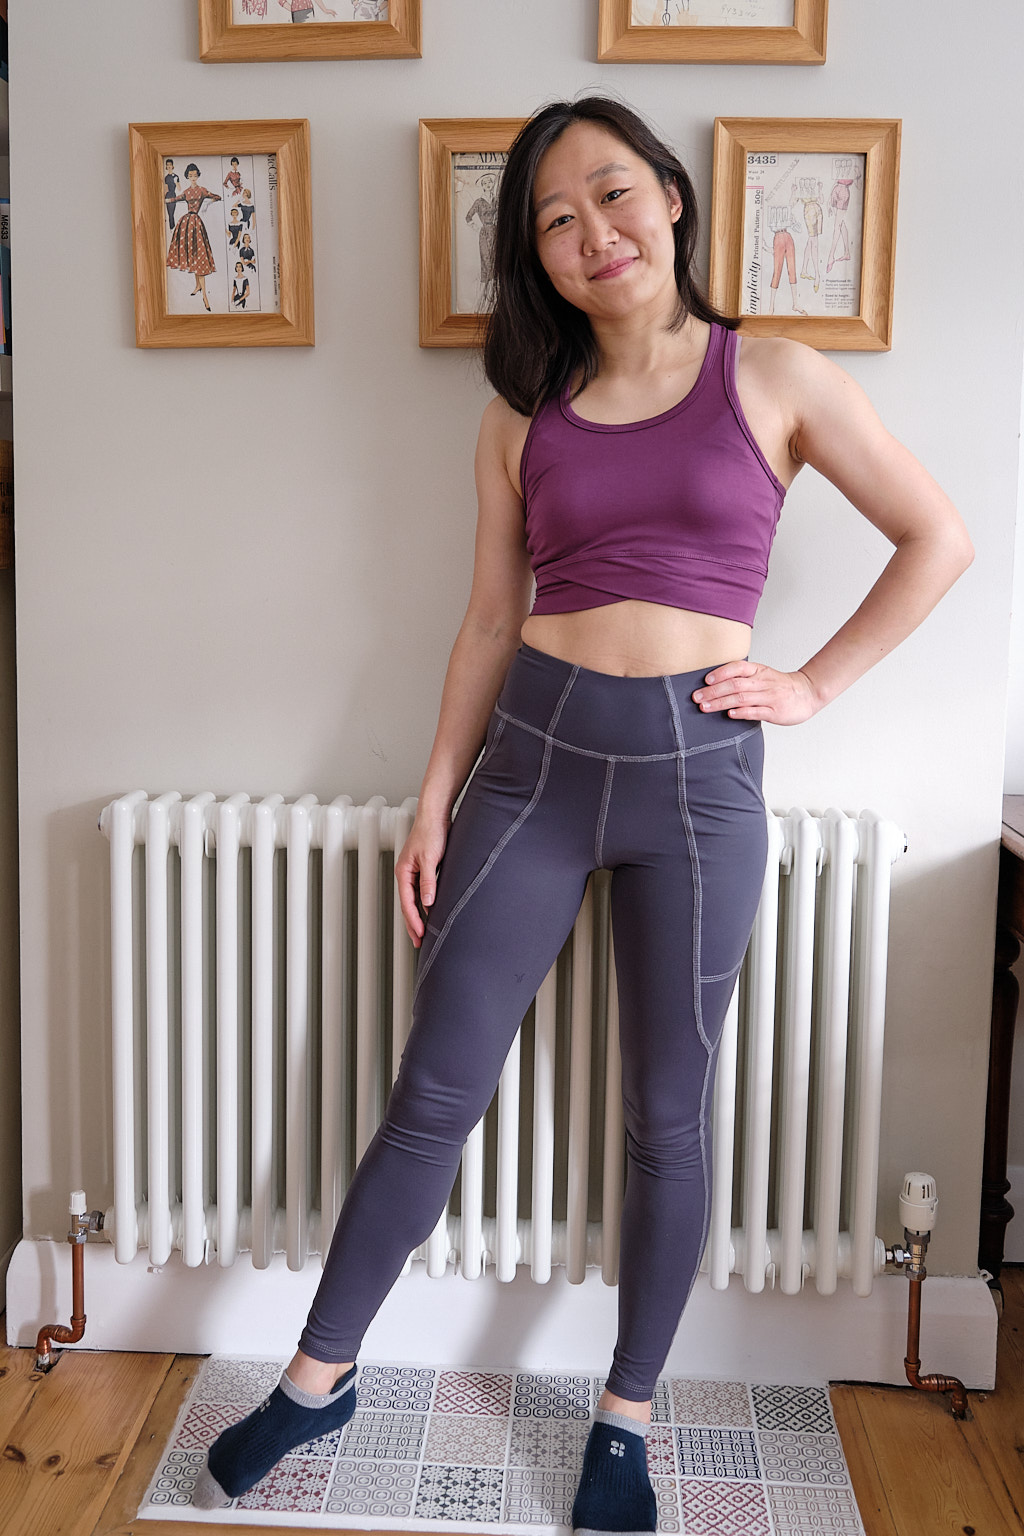 Queen of Darts: More activewear - Greenstyle Cavallo & Elevate (including  Fit Capsule Part 2)